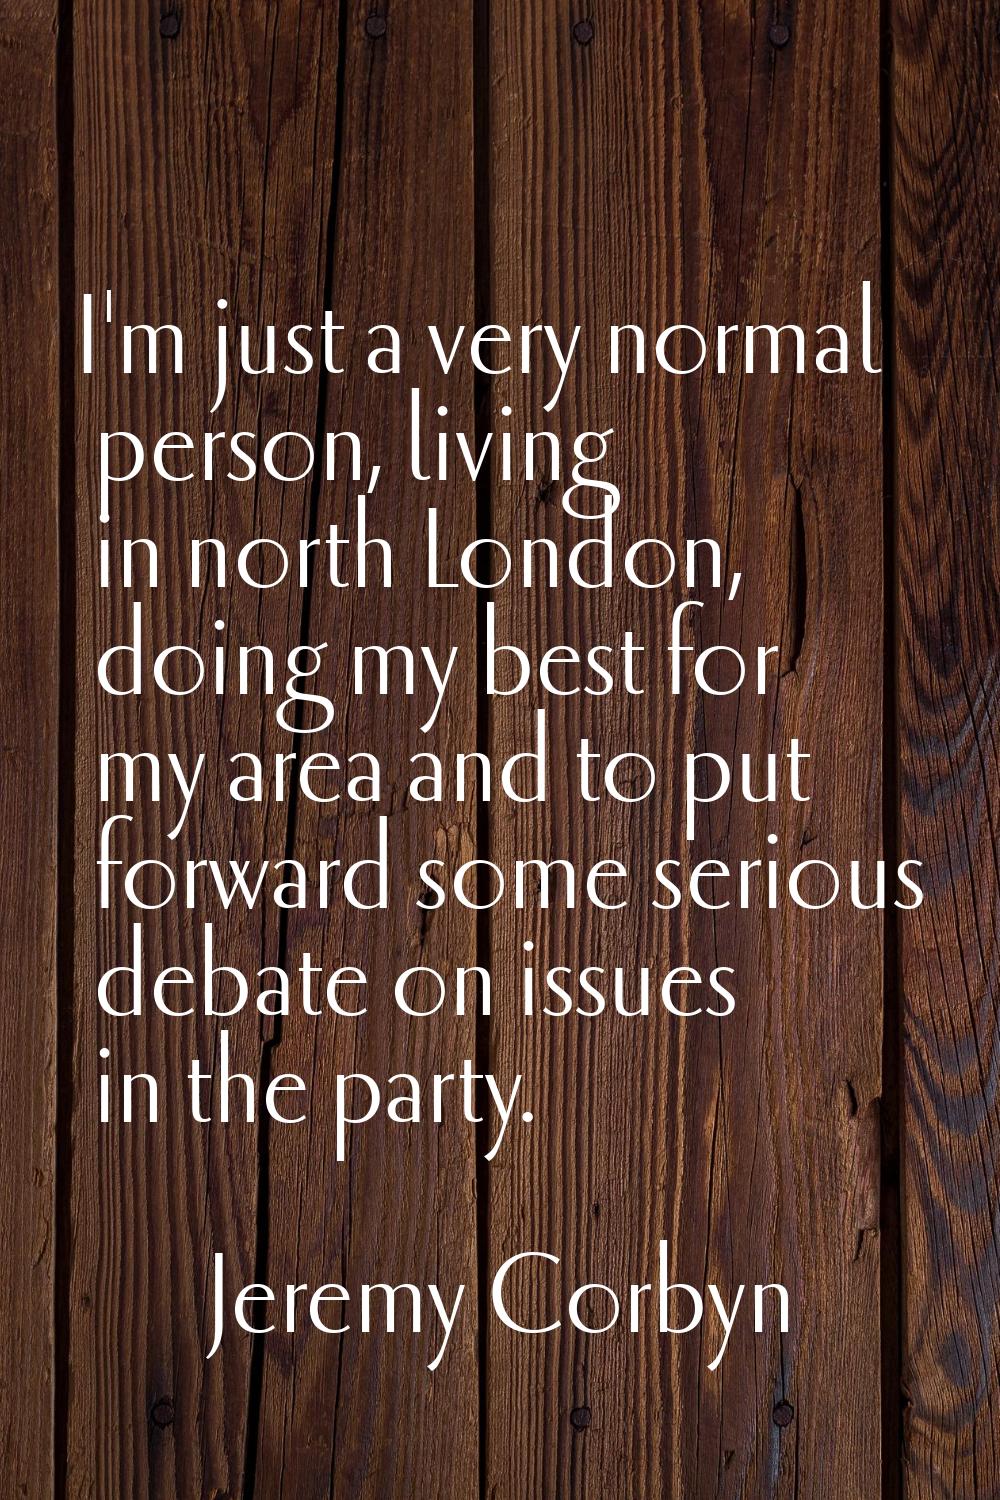 I'm just a very normal person, living in north London, doing my best for my area and to put forward